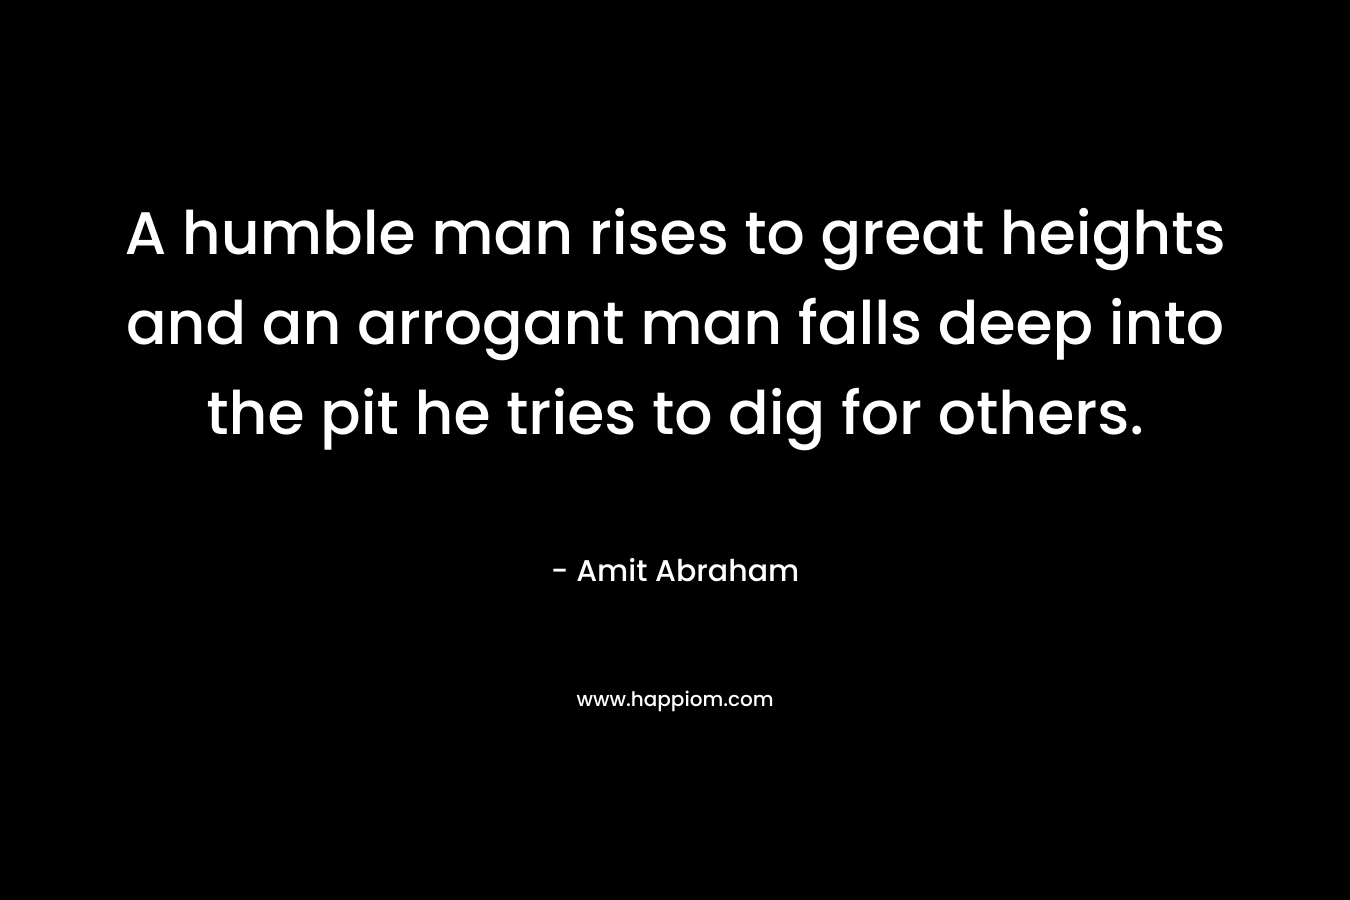 A humble man rises to great heights and an arrogant man falls deep into the pit he tries to dig for others. – Amit Abraham